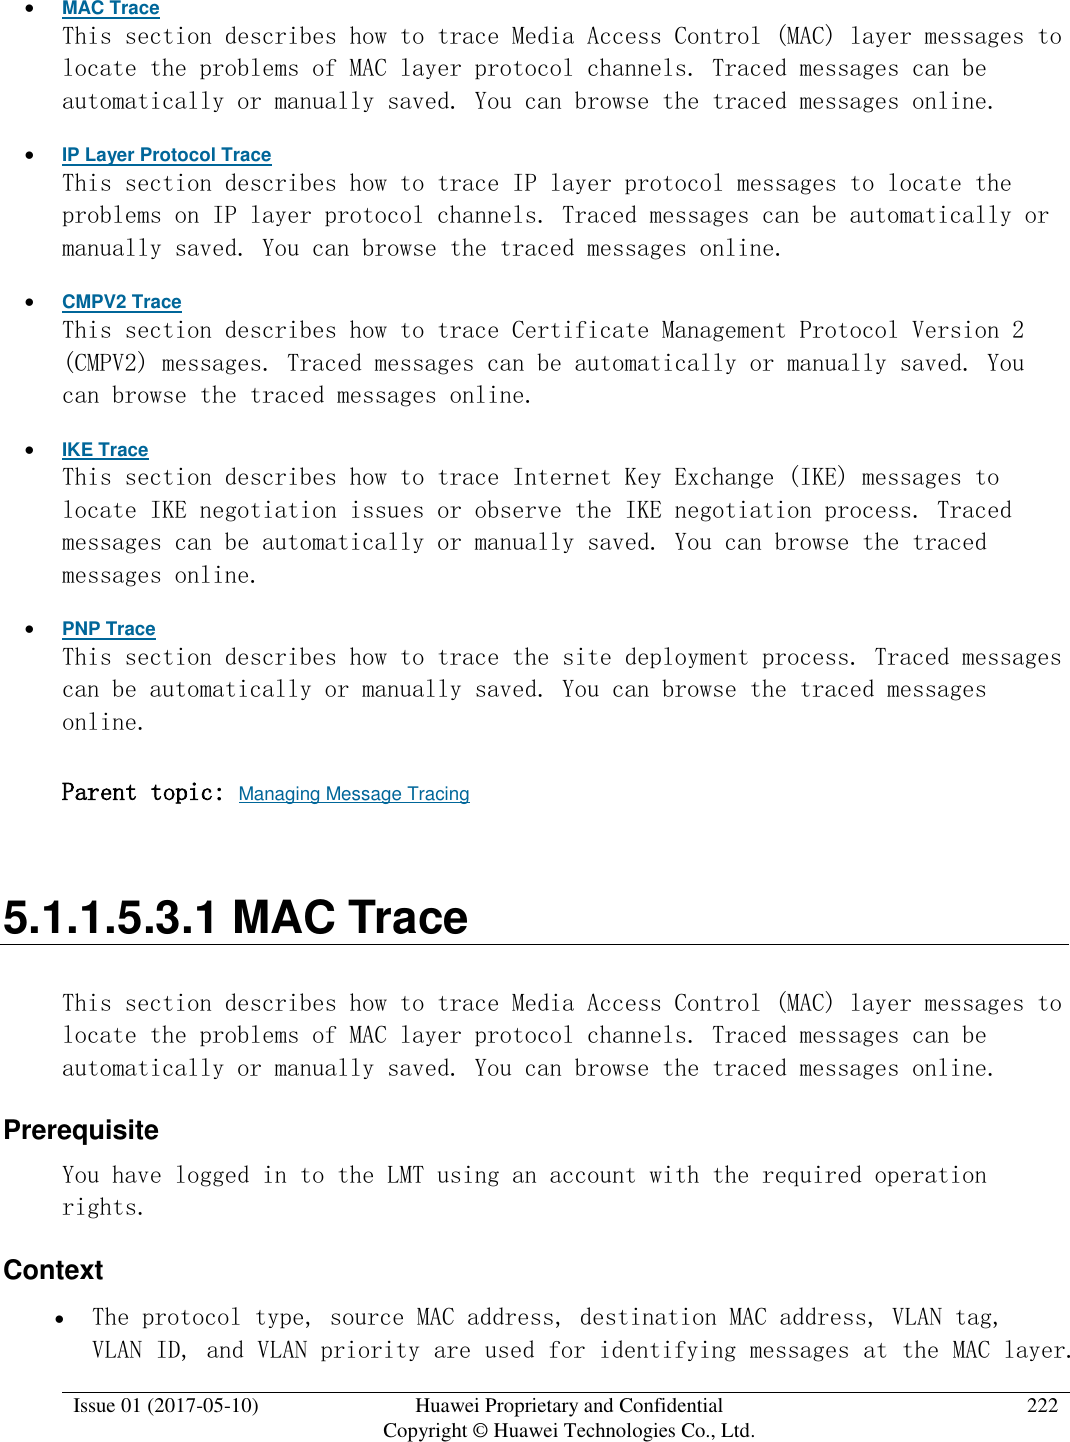  Issue 01 (2017-05-10) Huawei Proprietary and Confidential      Copyright © Huawei Technologies Co., Ltd. 222   MAC Trace This section describes how to trace Media Access Control (MAC) layer messages to locate the problems of MAC layer protocol channels. Traced messages can be automatically or manually saved. You can browse the traced messages online.  IP Layer Protocol Trace This section describes how to trace IP layer protocol messages to locate the problems on IP layer protocol channels. Traced messages can be automatically or manually saved. You can browse the traced messages online.  CMPV2 Trace This section describes how to trace Certificate Management Protocol Version 2 (CMPV2) messages. Traced messages can be automatically or manually saved. You can browse the traced messages online.  IKE Trace This section describes how to trace Internet Key Exchange (IKE) messages to locate IKE negotiation issues or observe the IKE negotiation process. Traced messages can be automatically or manually saved. You can browse the traced messages online.  PNP Trace This section describes how to trace the site deployment process. Traced messages can be automatically or manually saved. You can browse the traced messages online. Parent topic: Managing Message Tracing 5.1.1.5.3.1 MAC Trace This section describes how to trace Media Access Control (MAC) layer messages to locate the problems of MAC layer protocol channels. Traced messages can be automatically or manually saved. You can browse the traced messages online. Prerequisite You have logged in to the LMT using an account with the required operation rights. Context  The protocol type, source MAC address, destination MAC address, VLAN tag, VLAN ID, and VLAN priority are used for identifying messages at the MAC layer. 